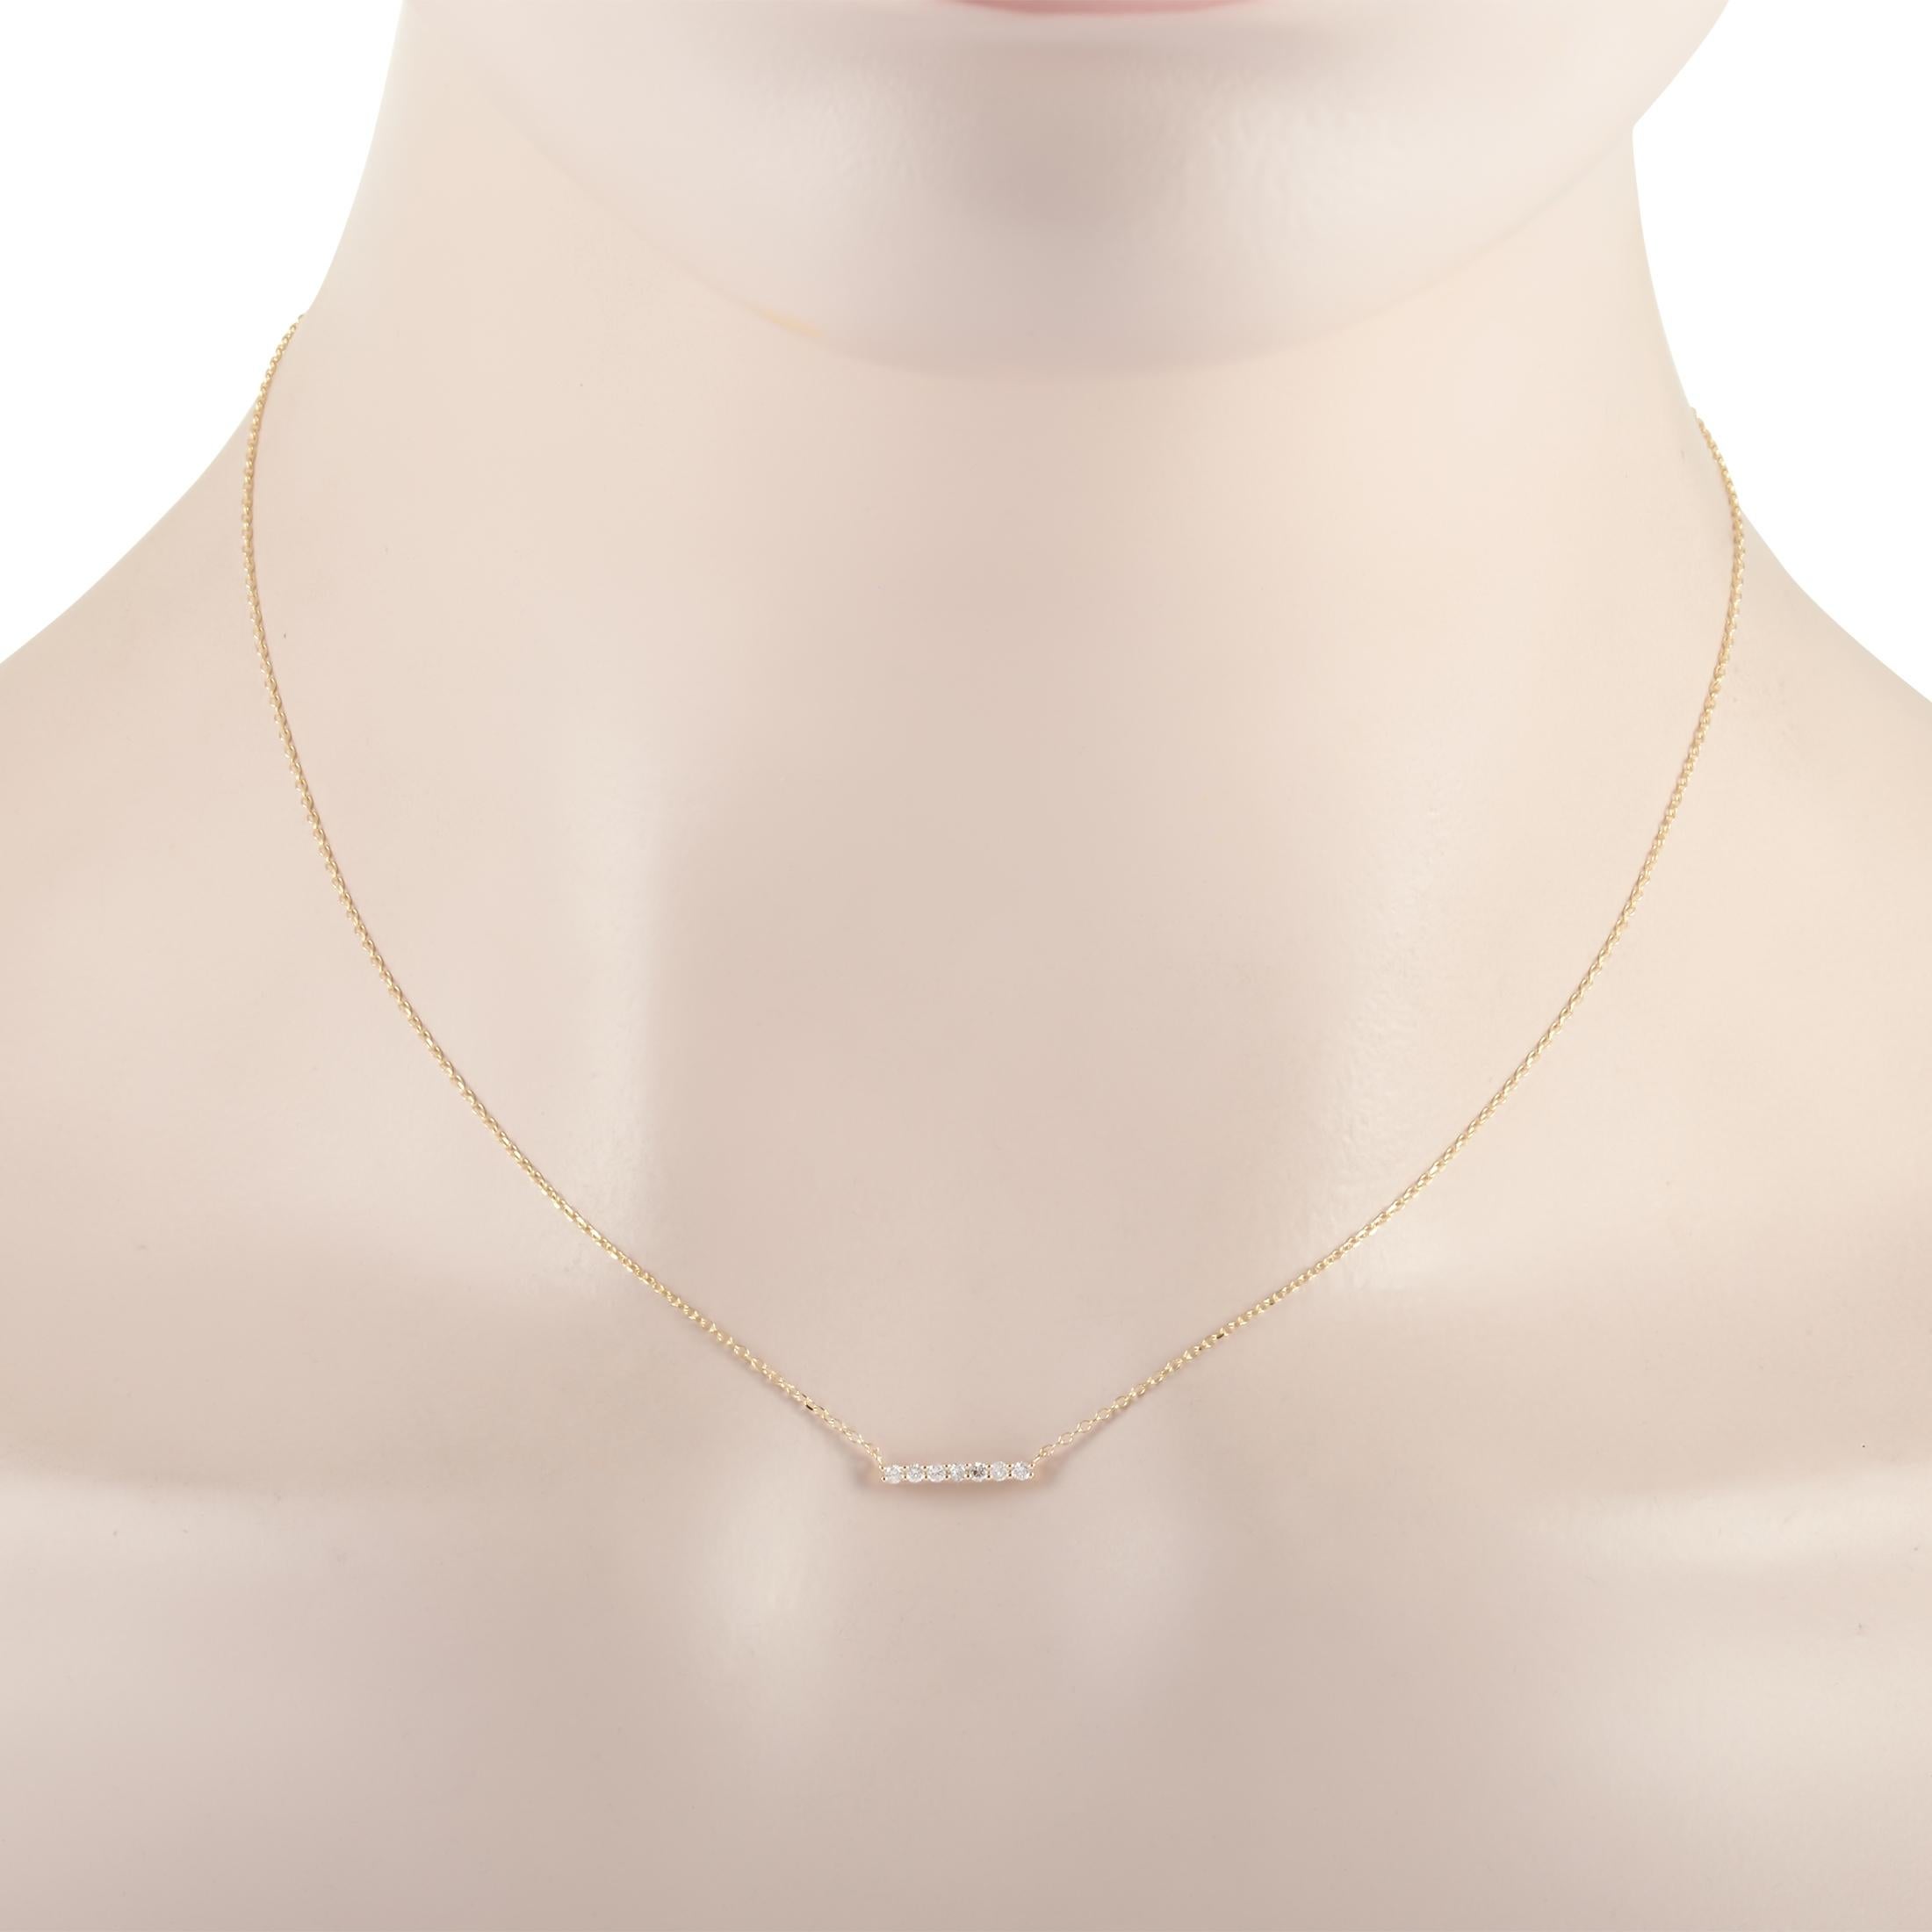 This LB Exclusive necklace is made of 14K yellow gold and embellished with diamonds that amount to 0.10 carats. The necklace weighs 1.3 grams and boasts a 15” chain and a pendant that measures 0.07” in length and 0.44” in width.

Offered in brand